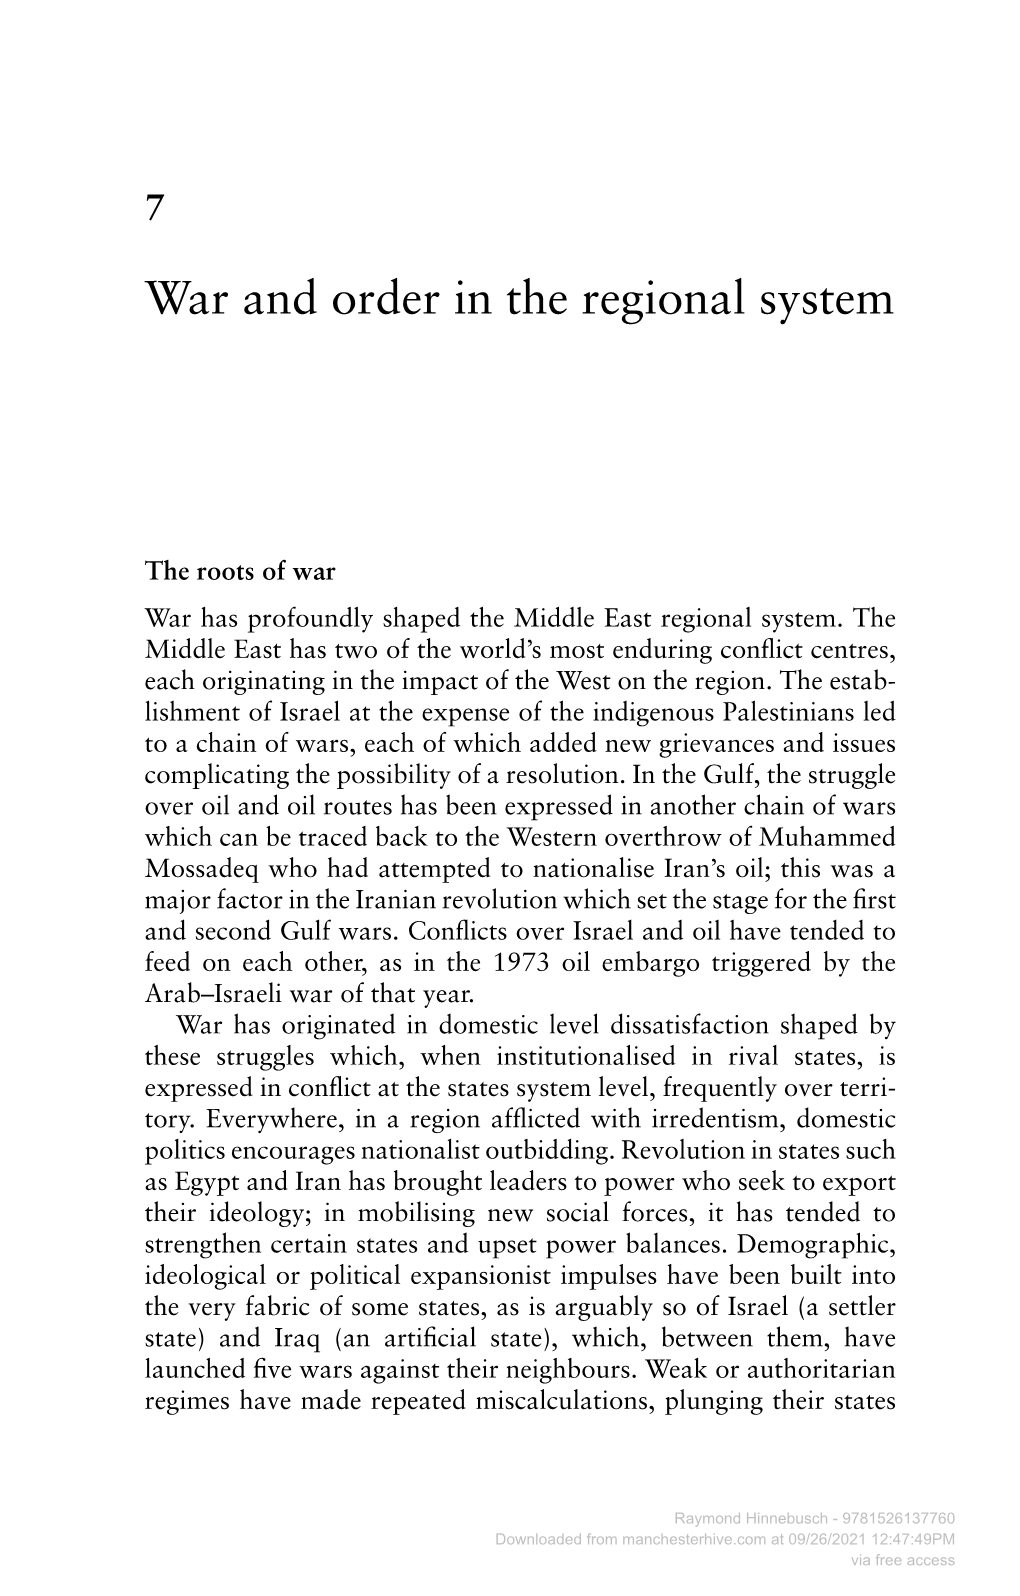 War and Order in the Regional System